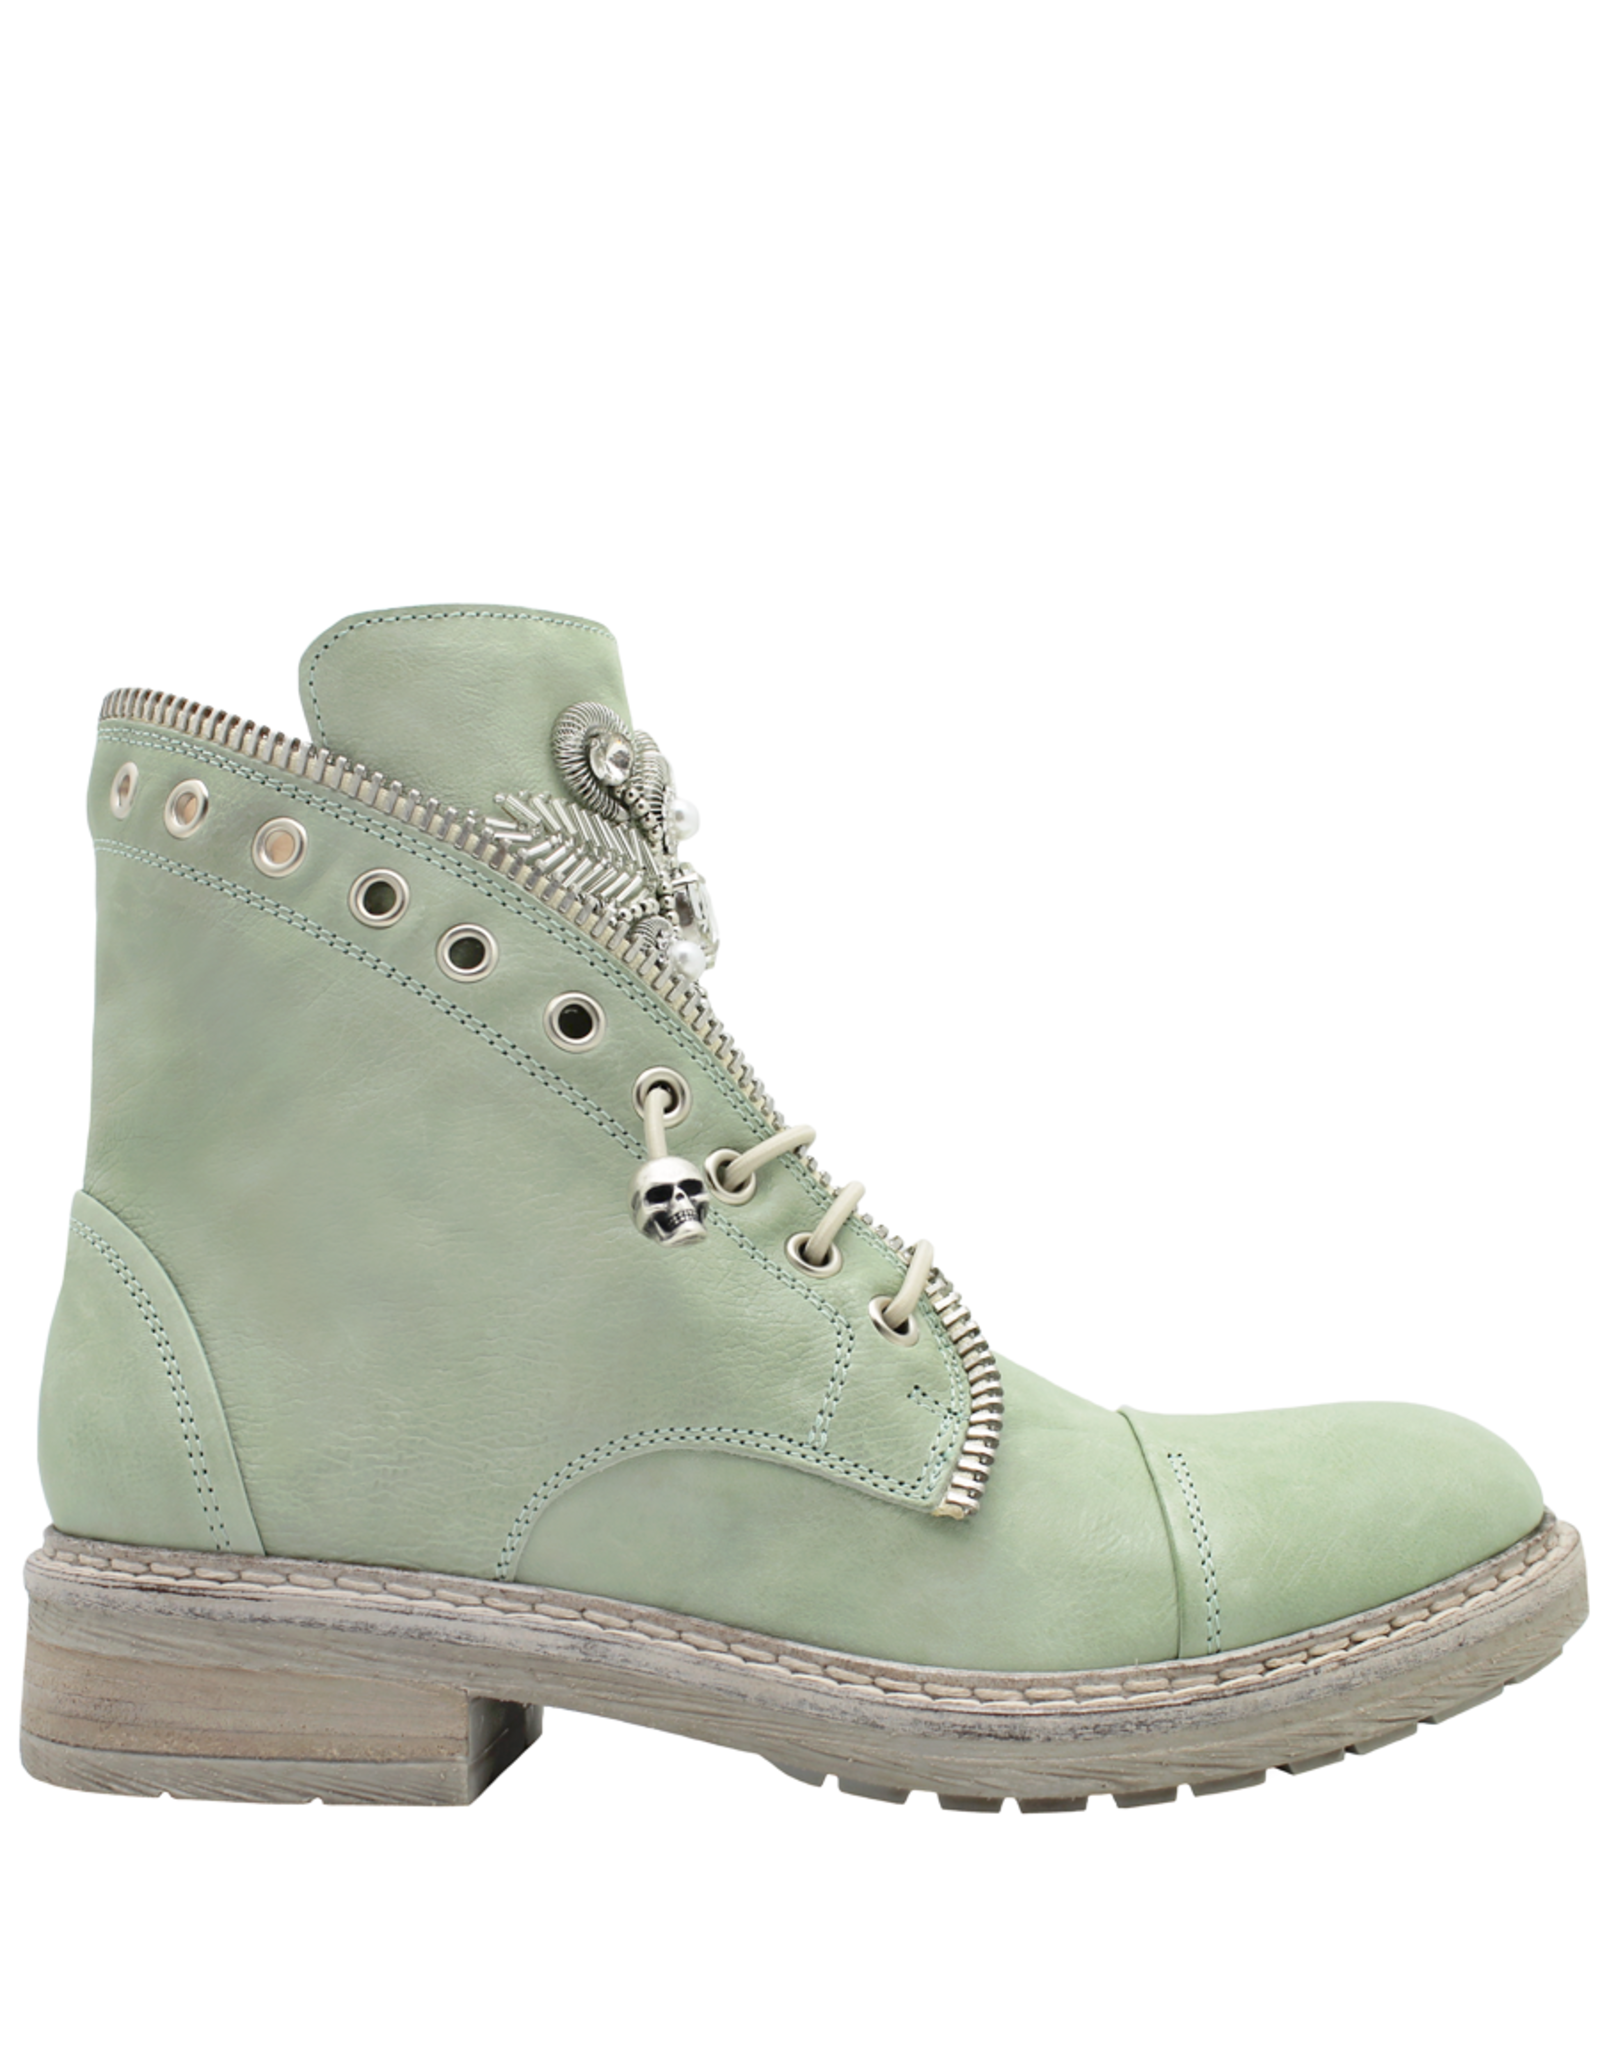 Now Now Mint Pull On Boot with Jewel Detail 7375